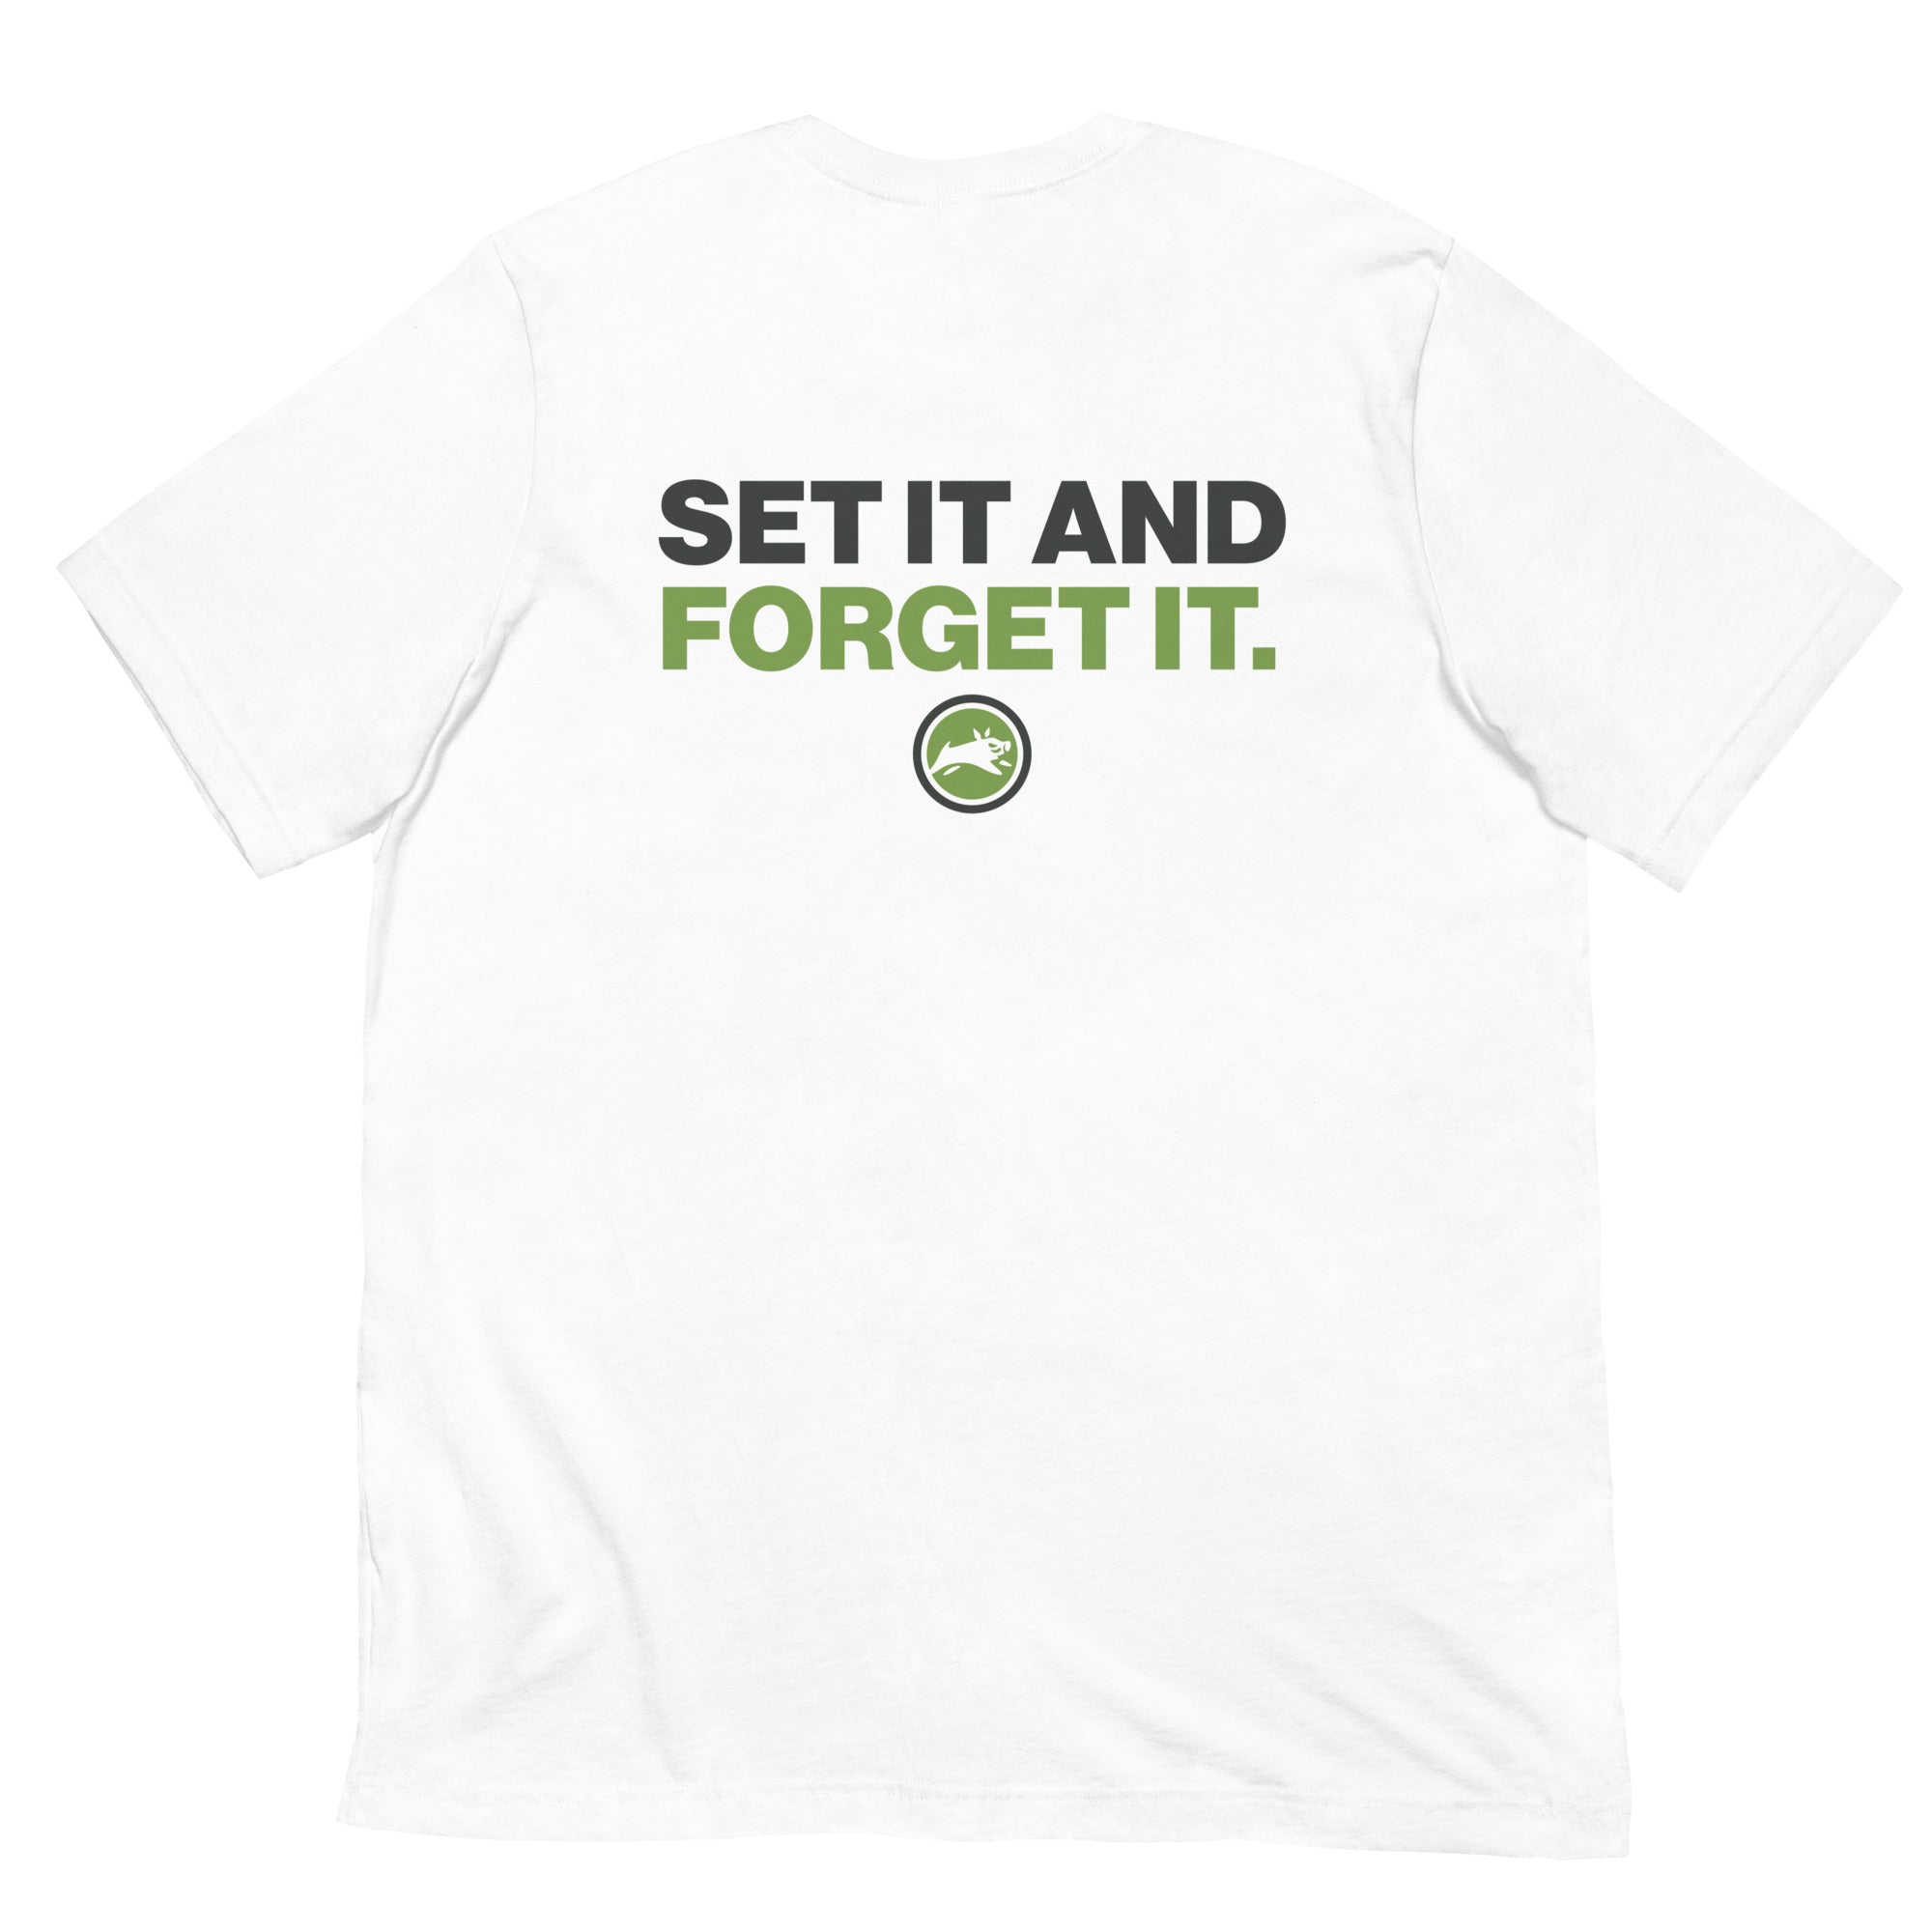 Set It and Forget It. - Short-Sleeve Unisex T-Shirt